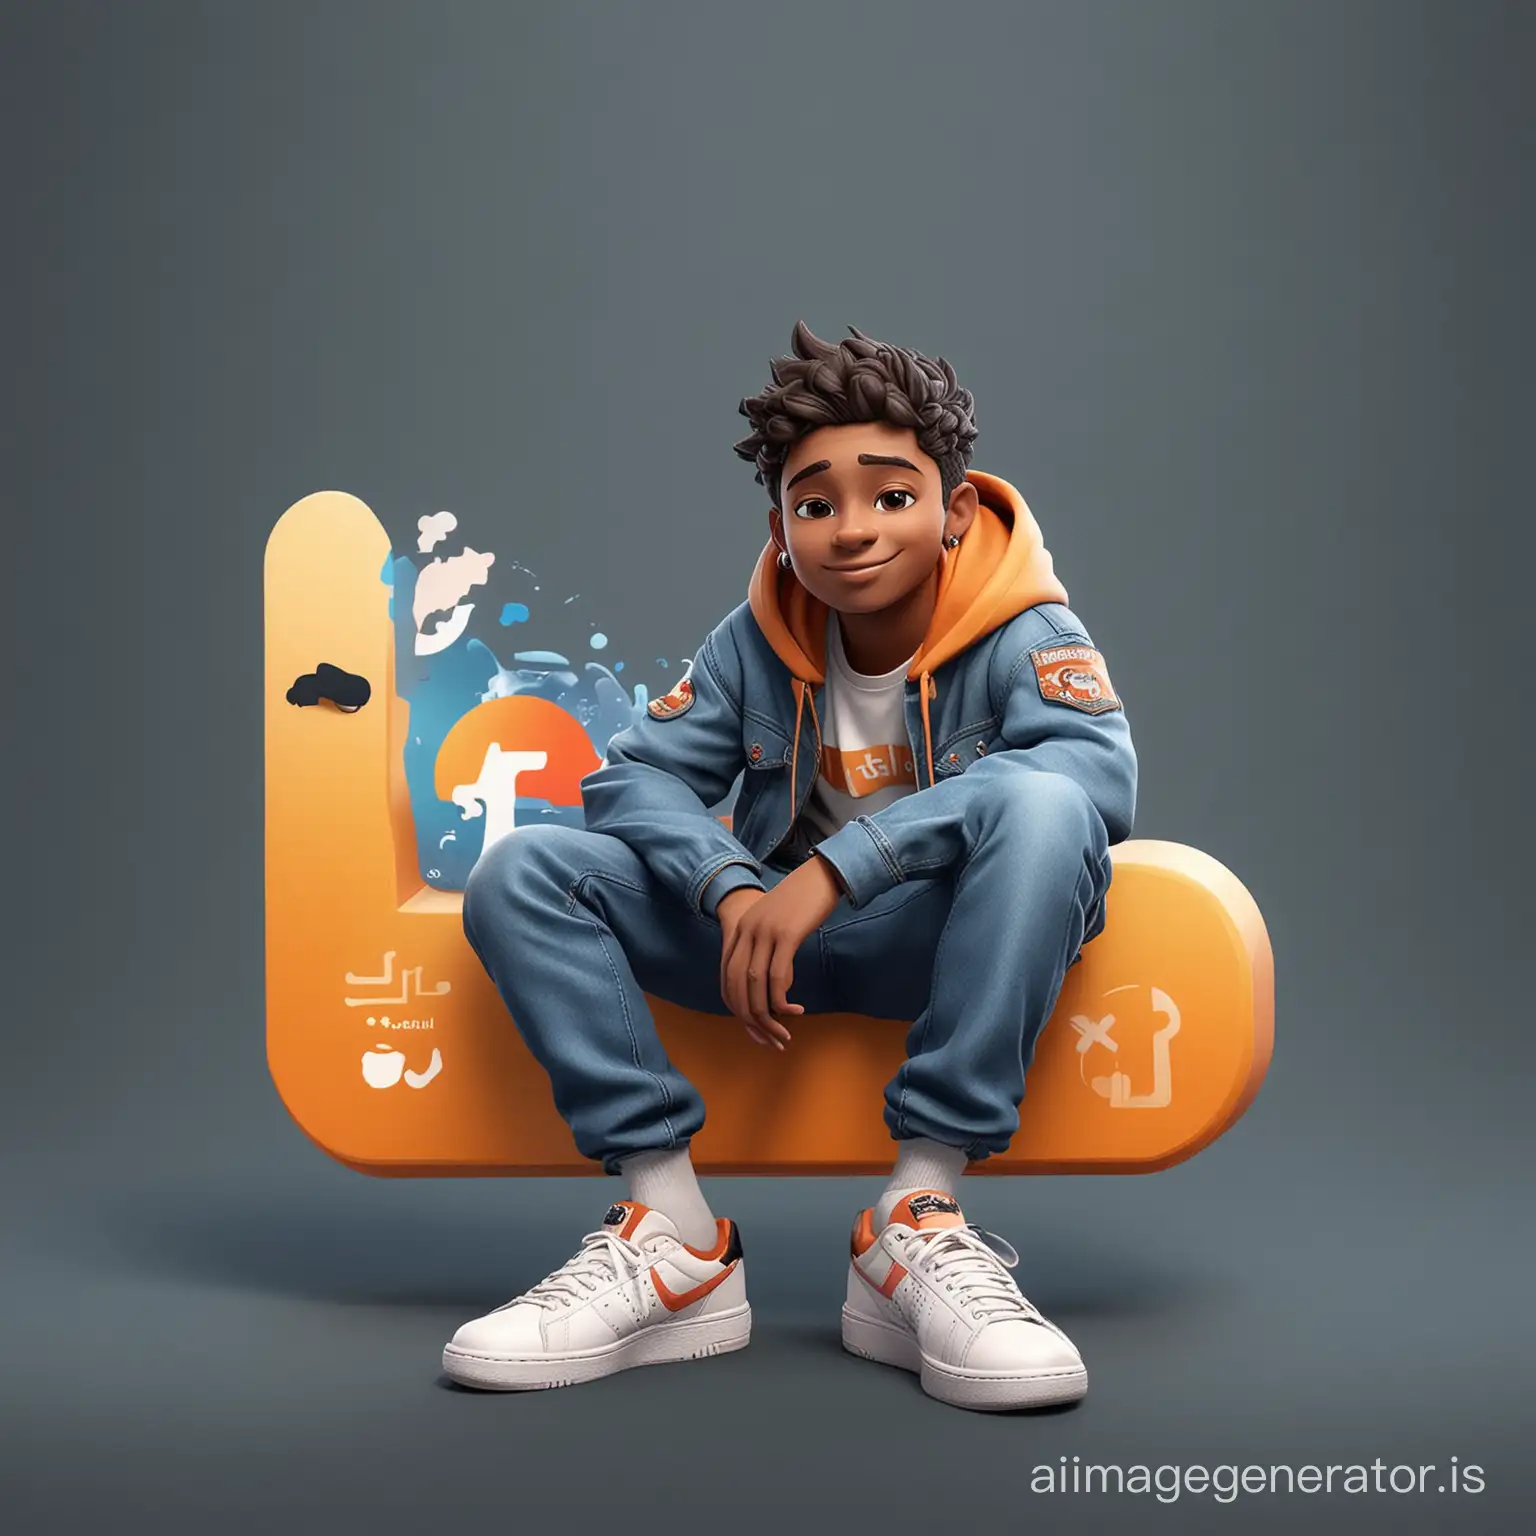 Create a 3D illustration of an animated character sitting casually on top of a social media logo 'X'. The character must wear casual modern clothing such as jeans jacket and sneakers shoes. The background of the image is a social media profile page with a user name 'Muhammad Bilal' and a profile picture that match.